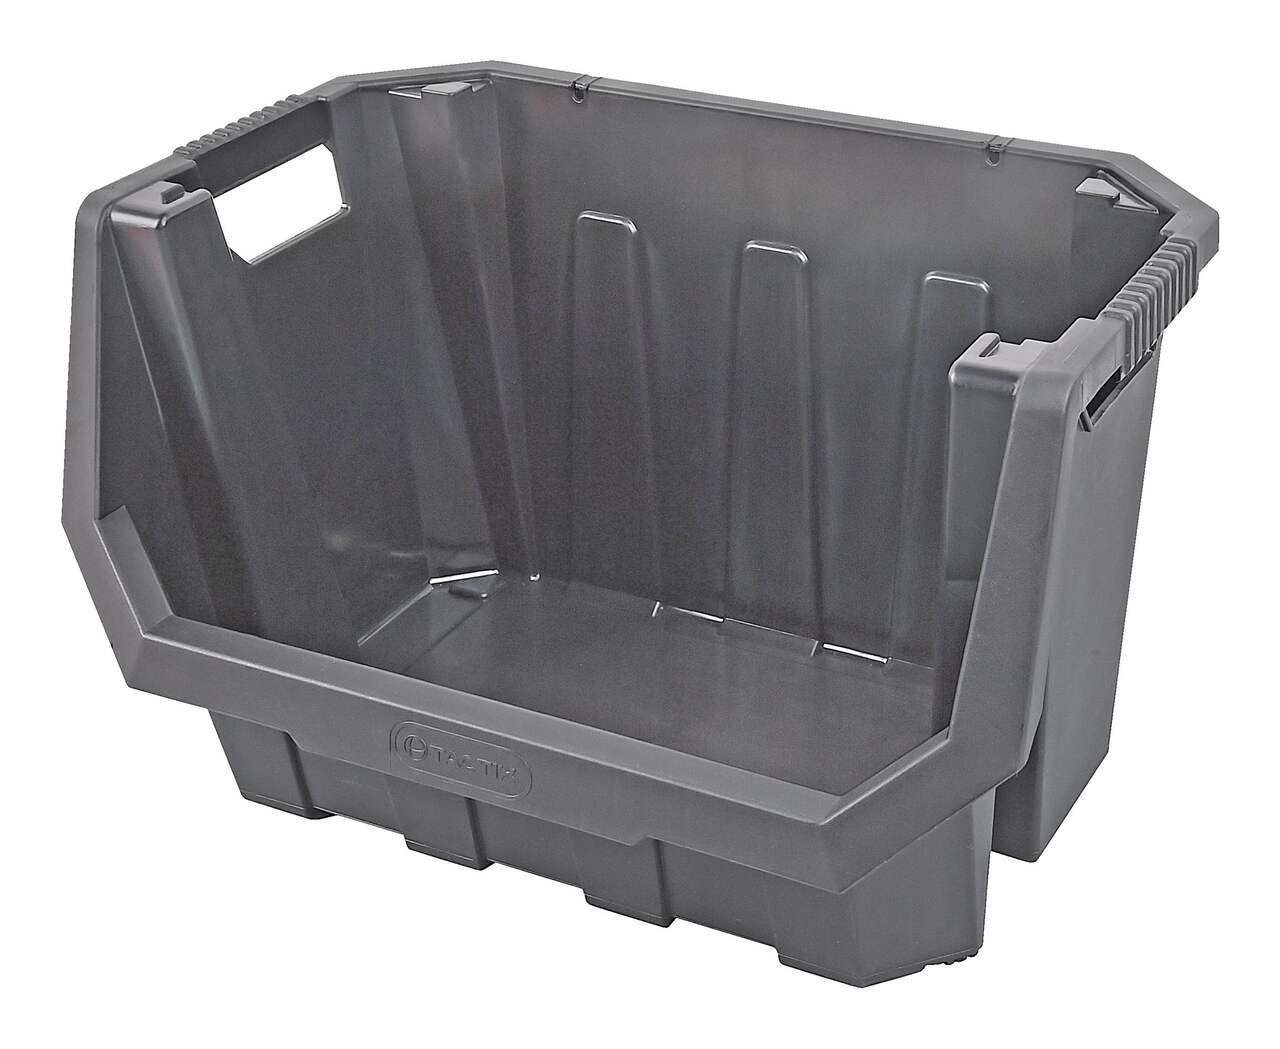 https://media-www.canadiantire.ca/product/fixing/tools/garage-organization/0460597/tactix-40-liter-stacking-bin-6ab2dd15-f0ac-49ea-a0cb-54bbe44a10b2-jpgrendition.jpg?imdensity=1&imwidth=640&impolicy=mZoom